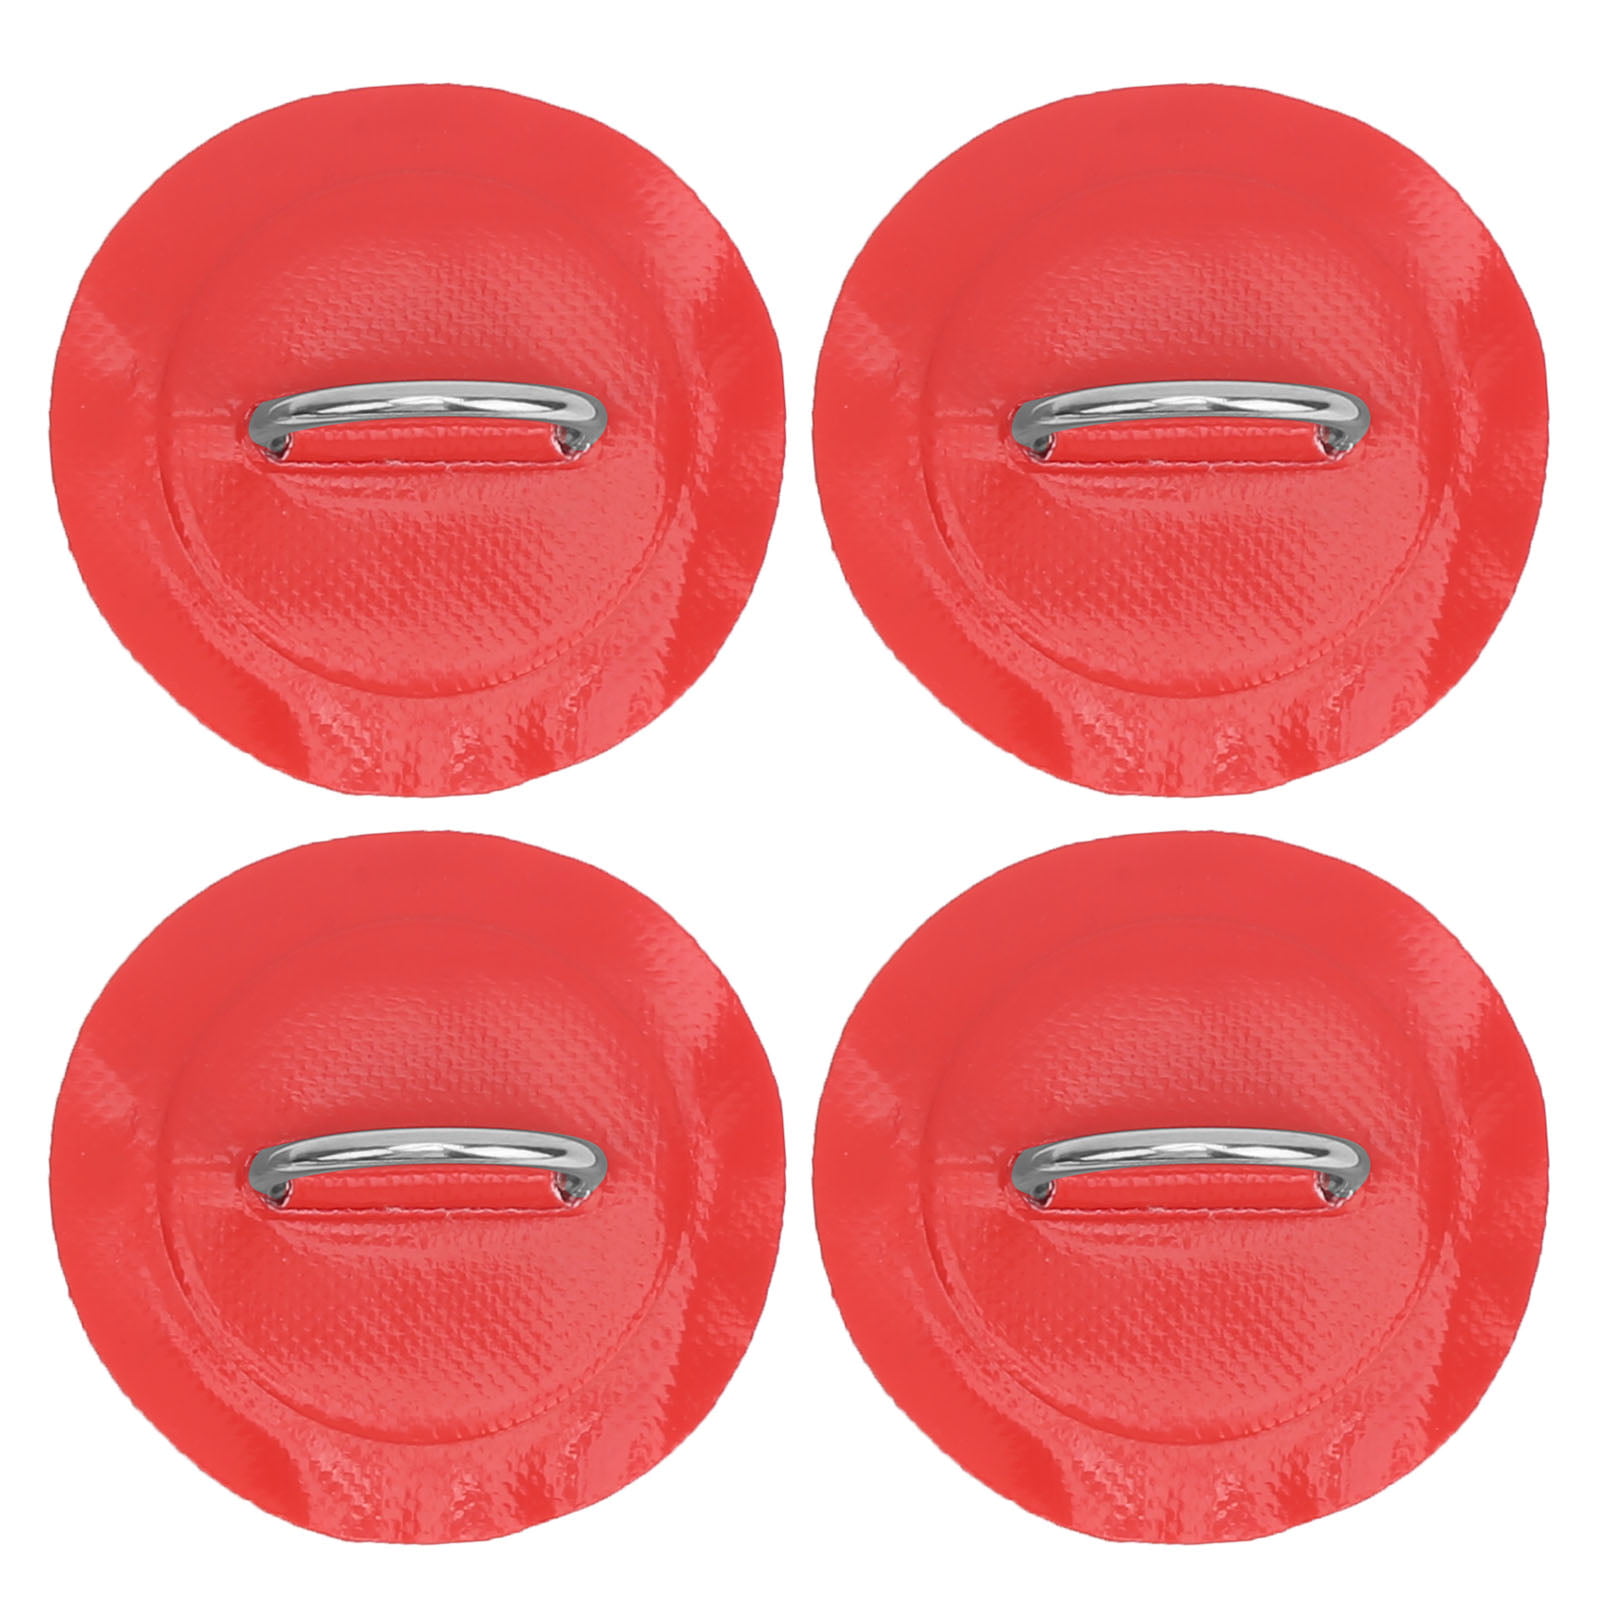 Details about   Stainless Steel D Ring Pad/Patch for Inflatable Boat Fishing Dinghy Kayak Canoe 